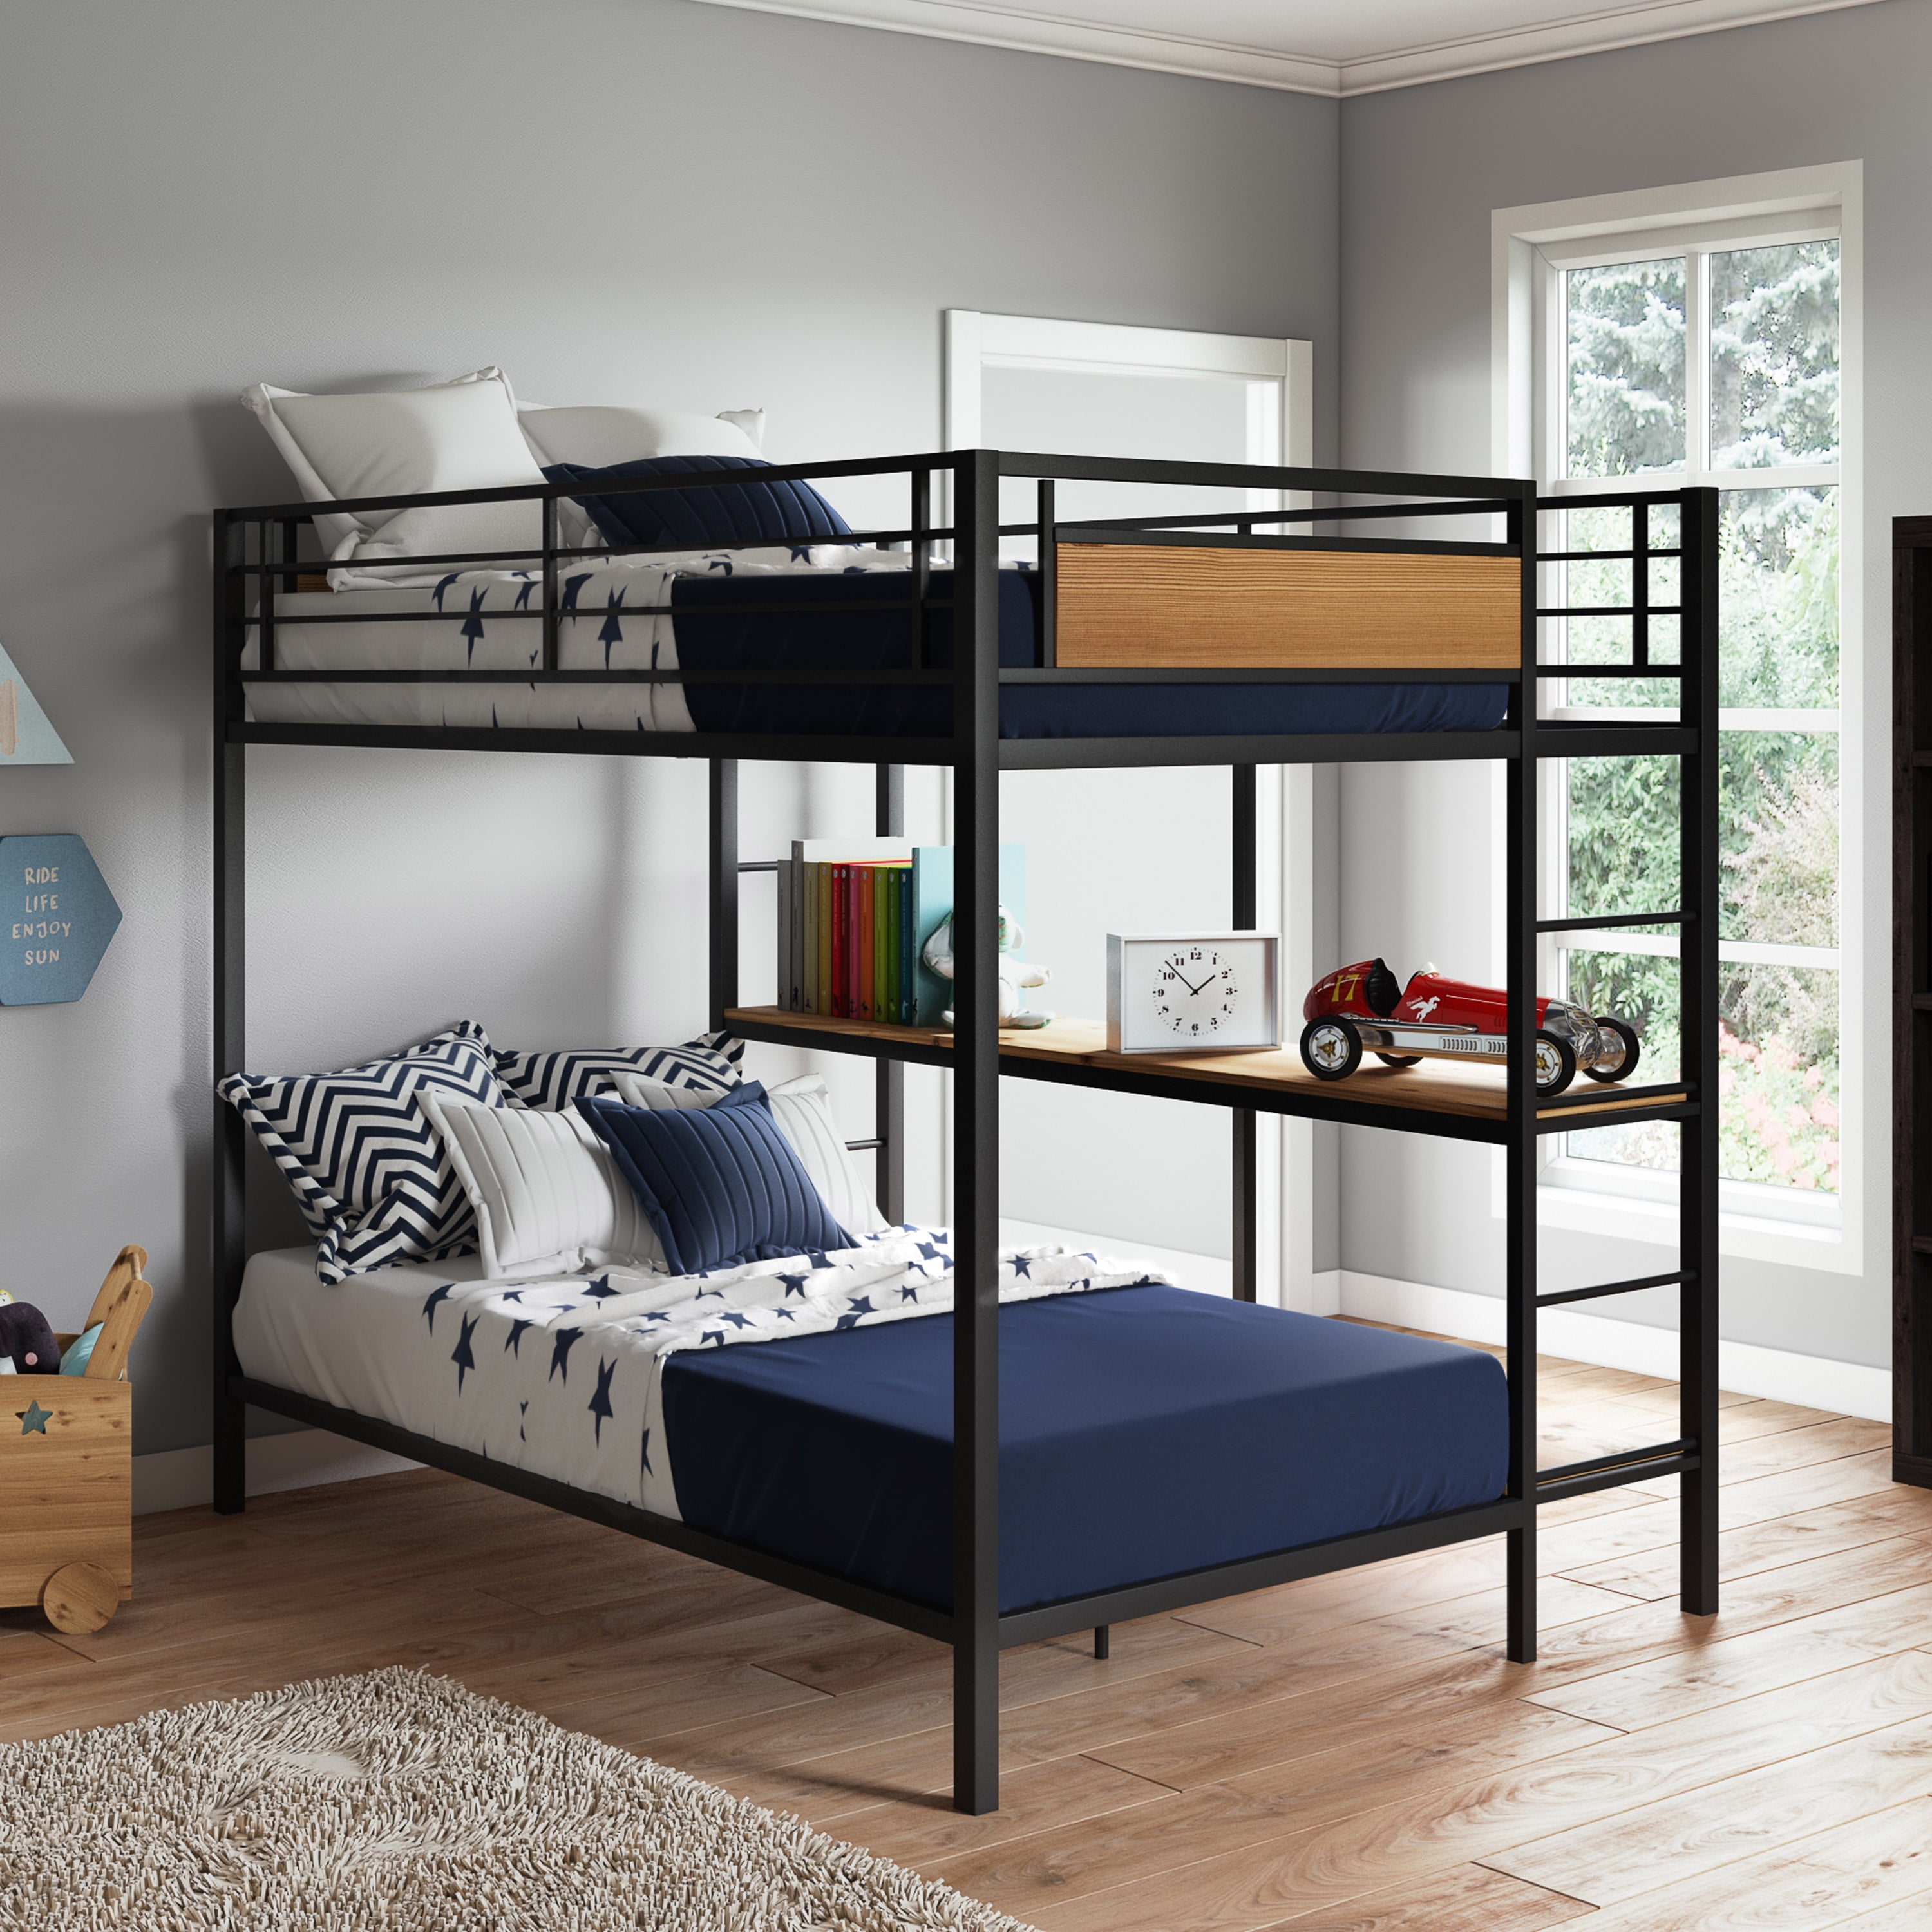 Gardens Austen Full Over Twin Bunk Bed, Bristol Valley Bunk Bed With Stairs